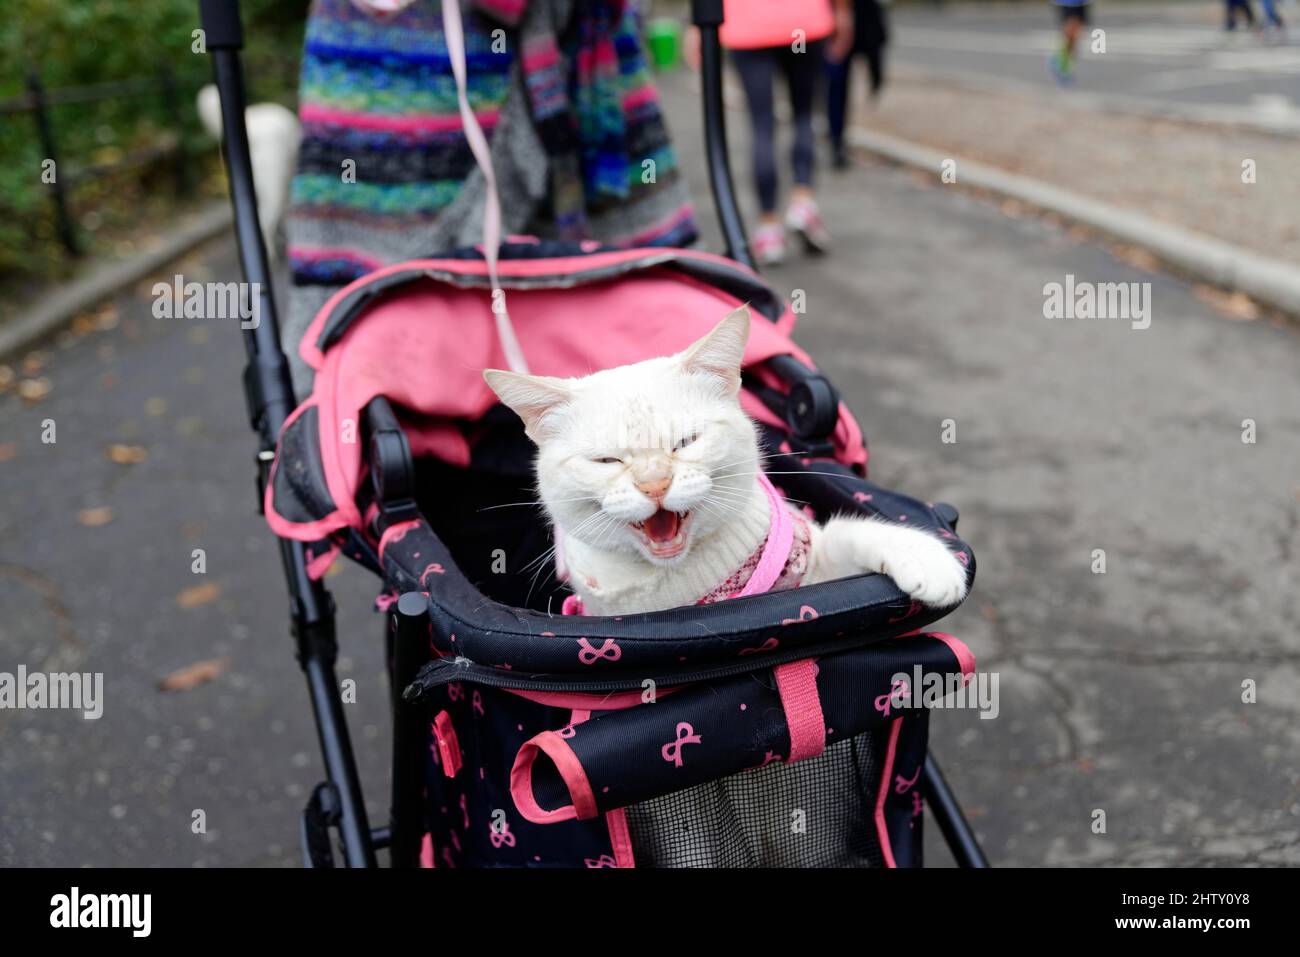 Cat in a pram, Central Park, New York City, United States of America Stock Photo